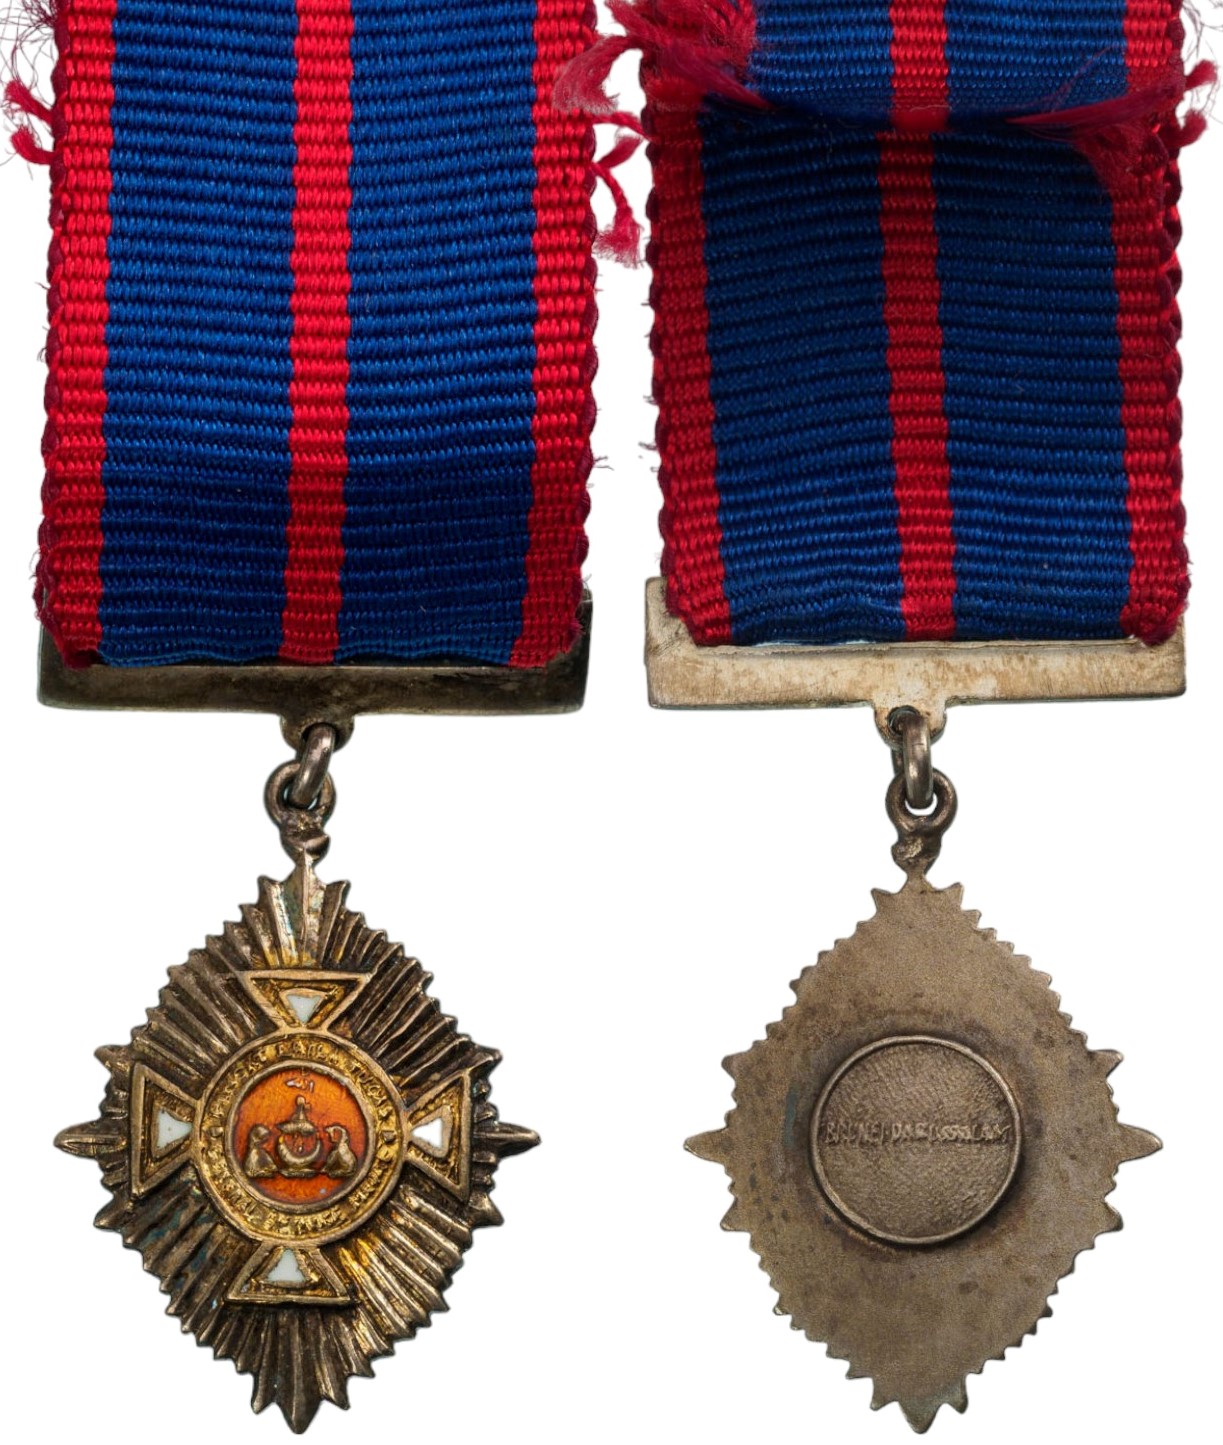 General Service Medal Awarded to British Personnel